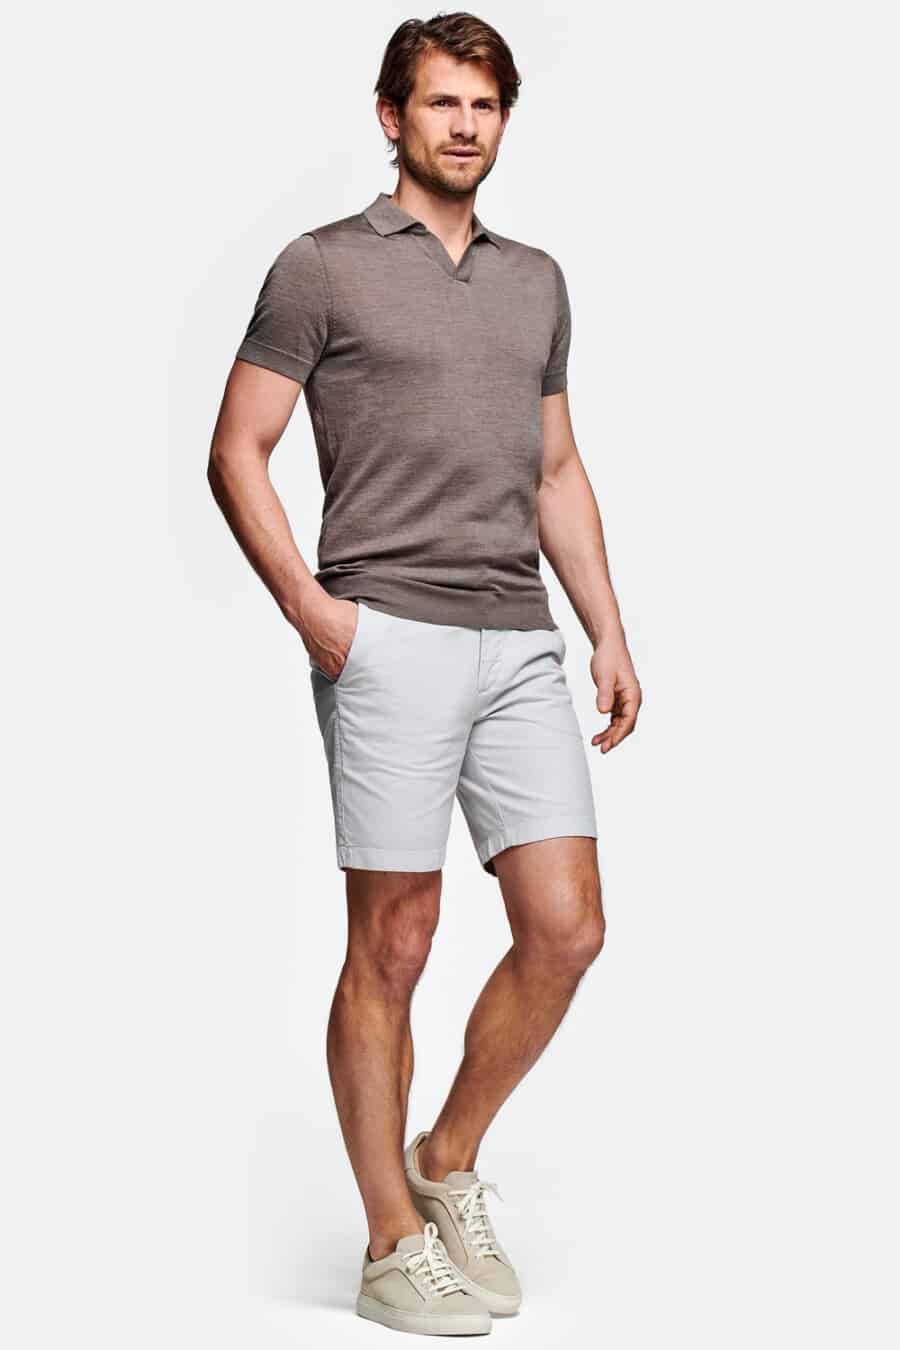 Men's light grey shorts, mid-grey knitted polo shirt and taupe sneakers outfit